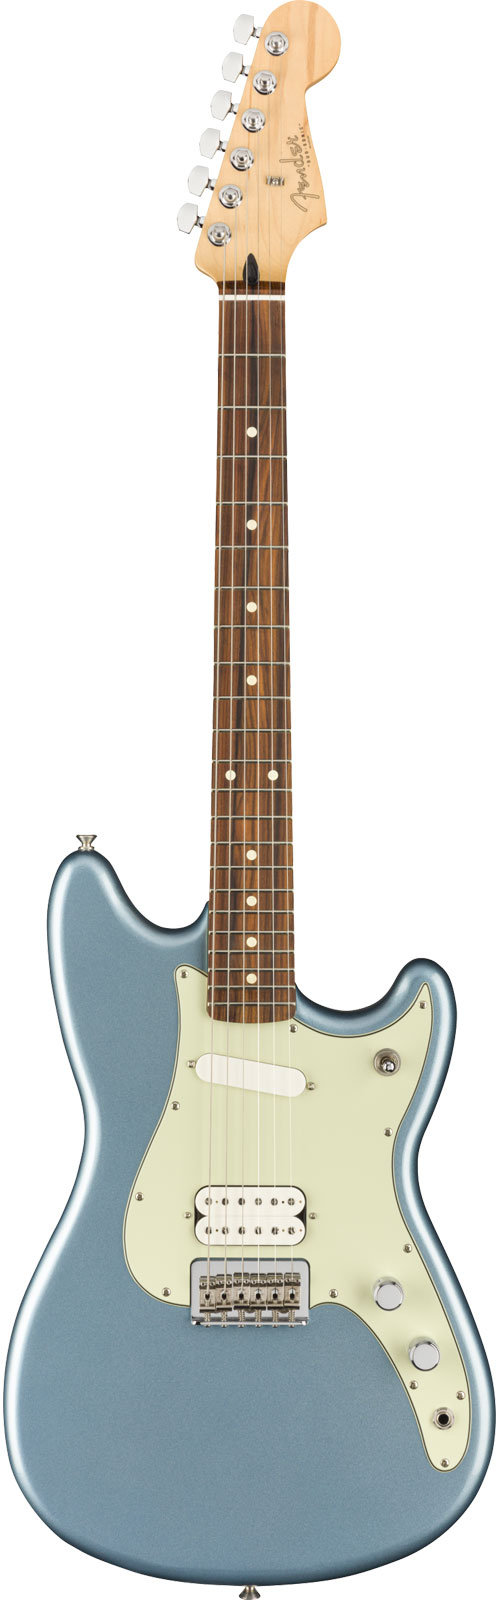 FENDER MEXICAN PLAYER DUO-SONIC HS PF, ICE BLUE METALLIC